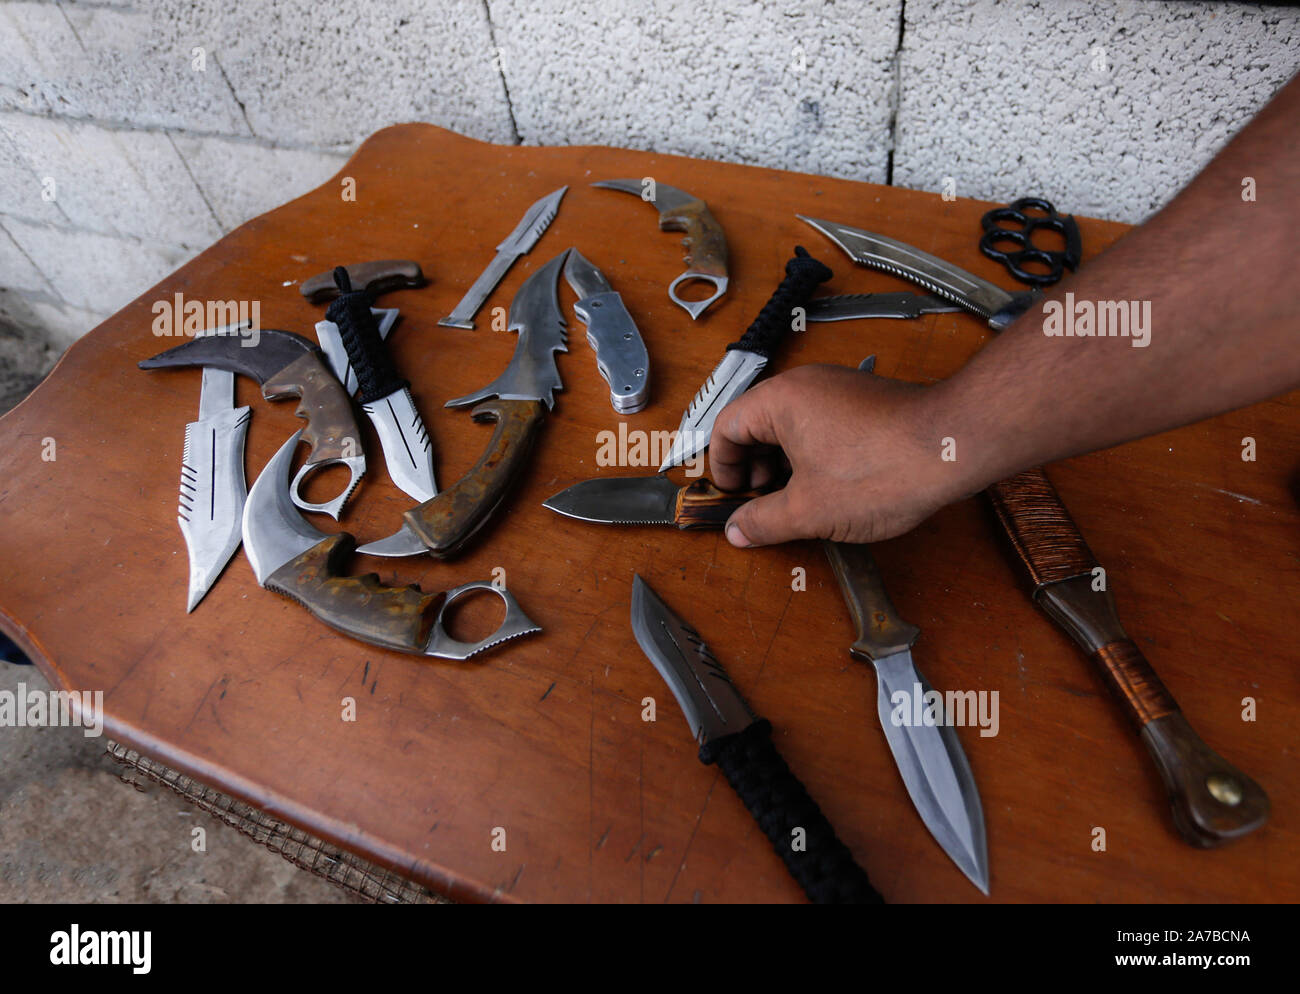 Gaza, Palestine. 29th Oct, 2019. Saif Abu Azza, a Palestinian Sword and Daggers Maker shows off the daggers at his workshop in Khan Younis.The sword and dagger are the oldest weapons that a man used to defend himself in ancient times and they are considered as the ancient fighting tools. They are used as artifacts and some tribes in different religions use them as a symbolic weapons. Credit: Yousef Masoud/SOPA Images/ZUMA Wire/Alamy Live News Stock Photo